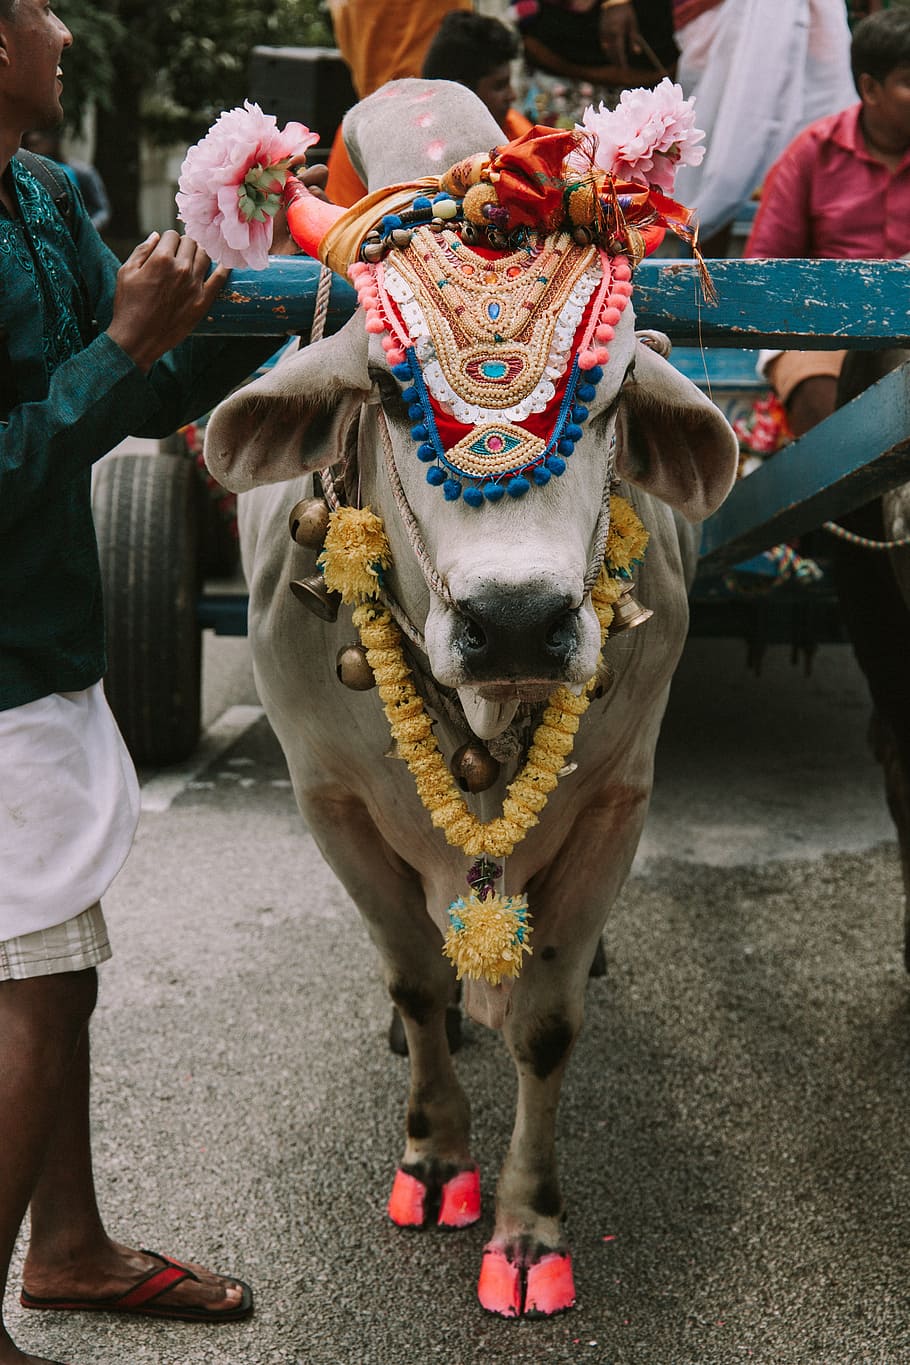 cow, holy, sacred, india, hinduism, traditional, animal, religious, spirituality, culture